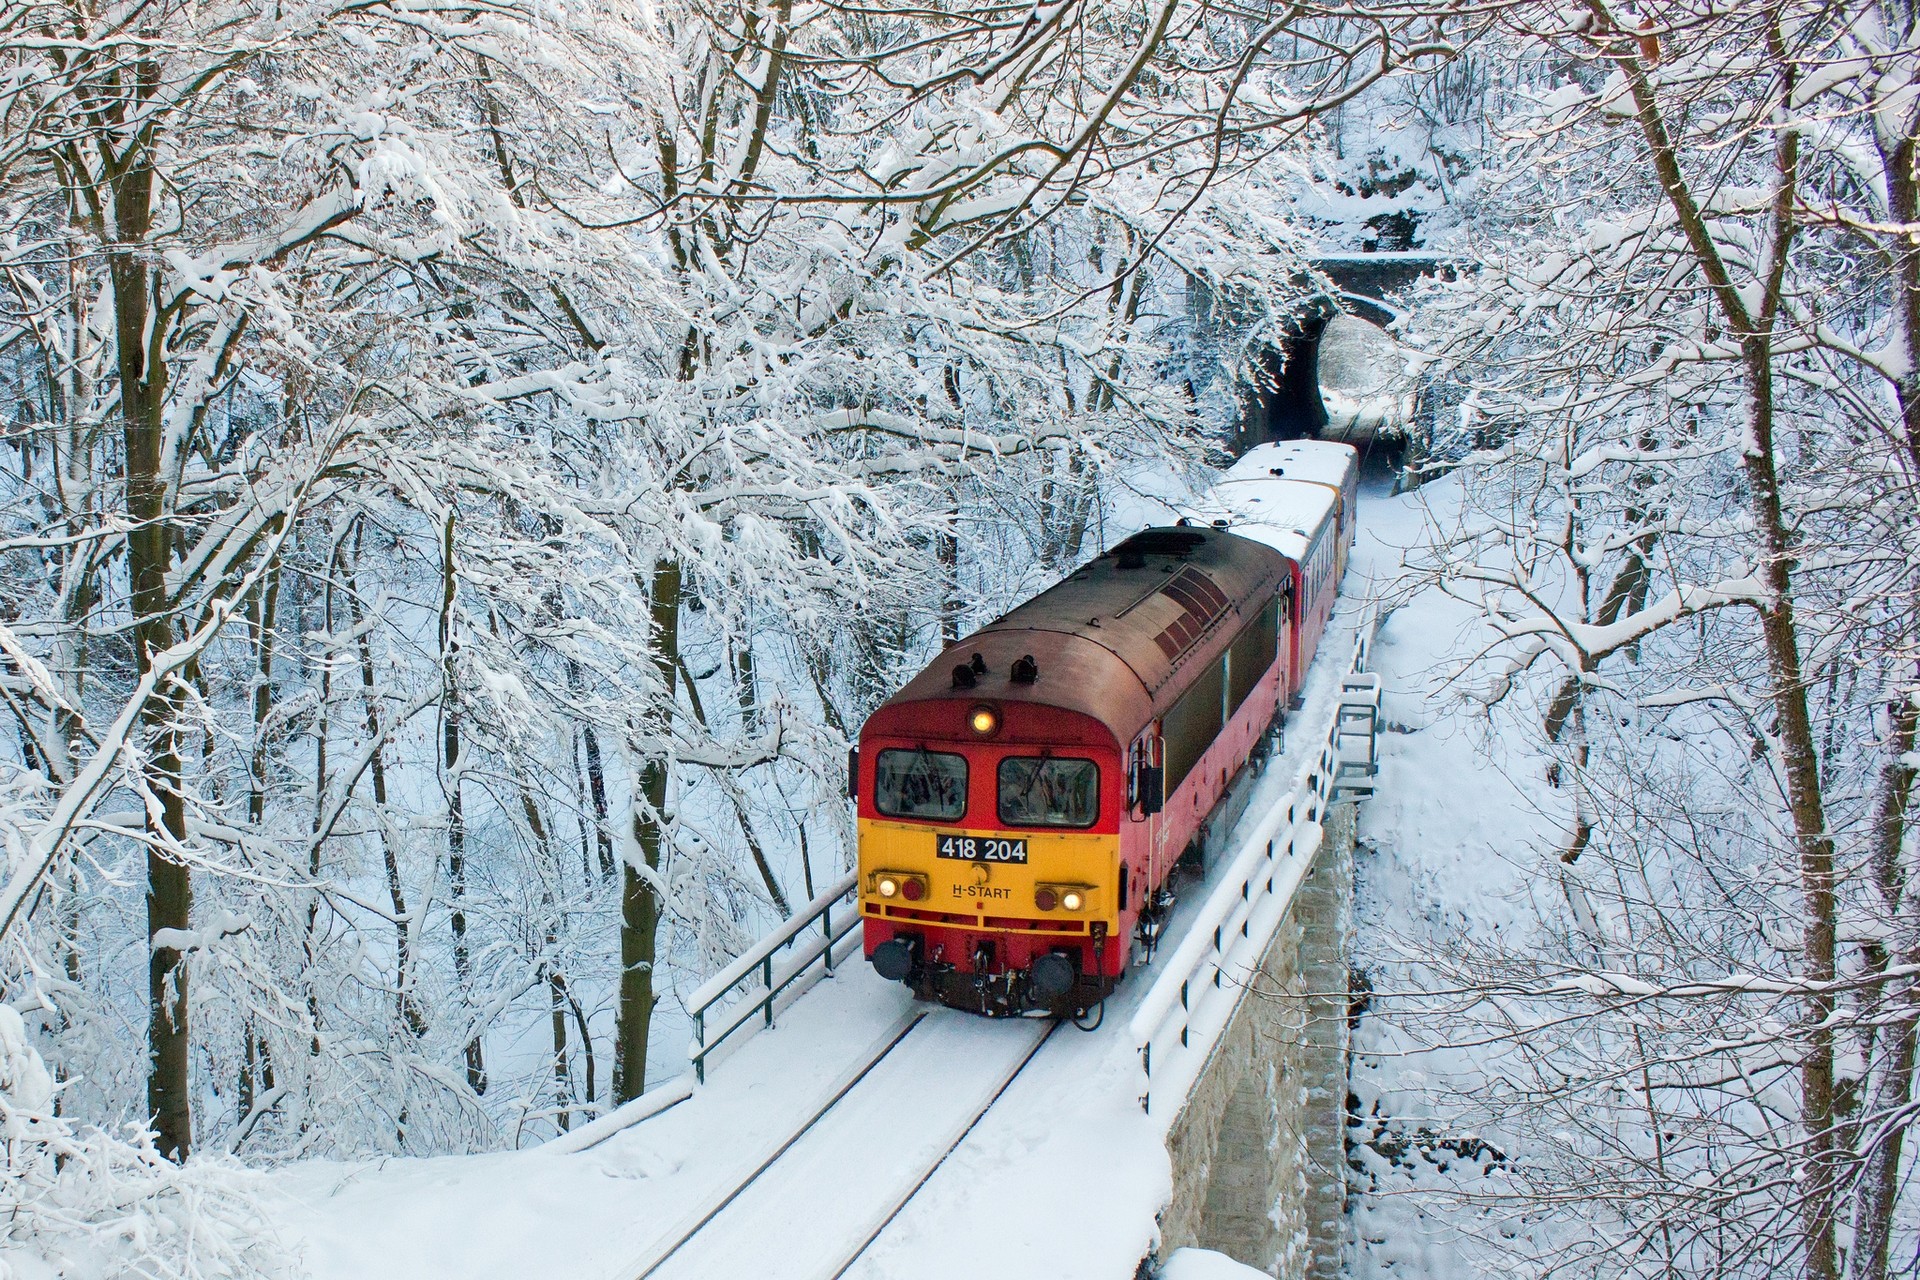  train  Winter  Wallpapers  HD Desktop and Mobile Backgrounds 